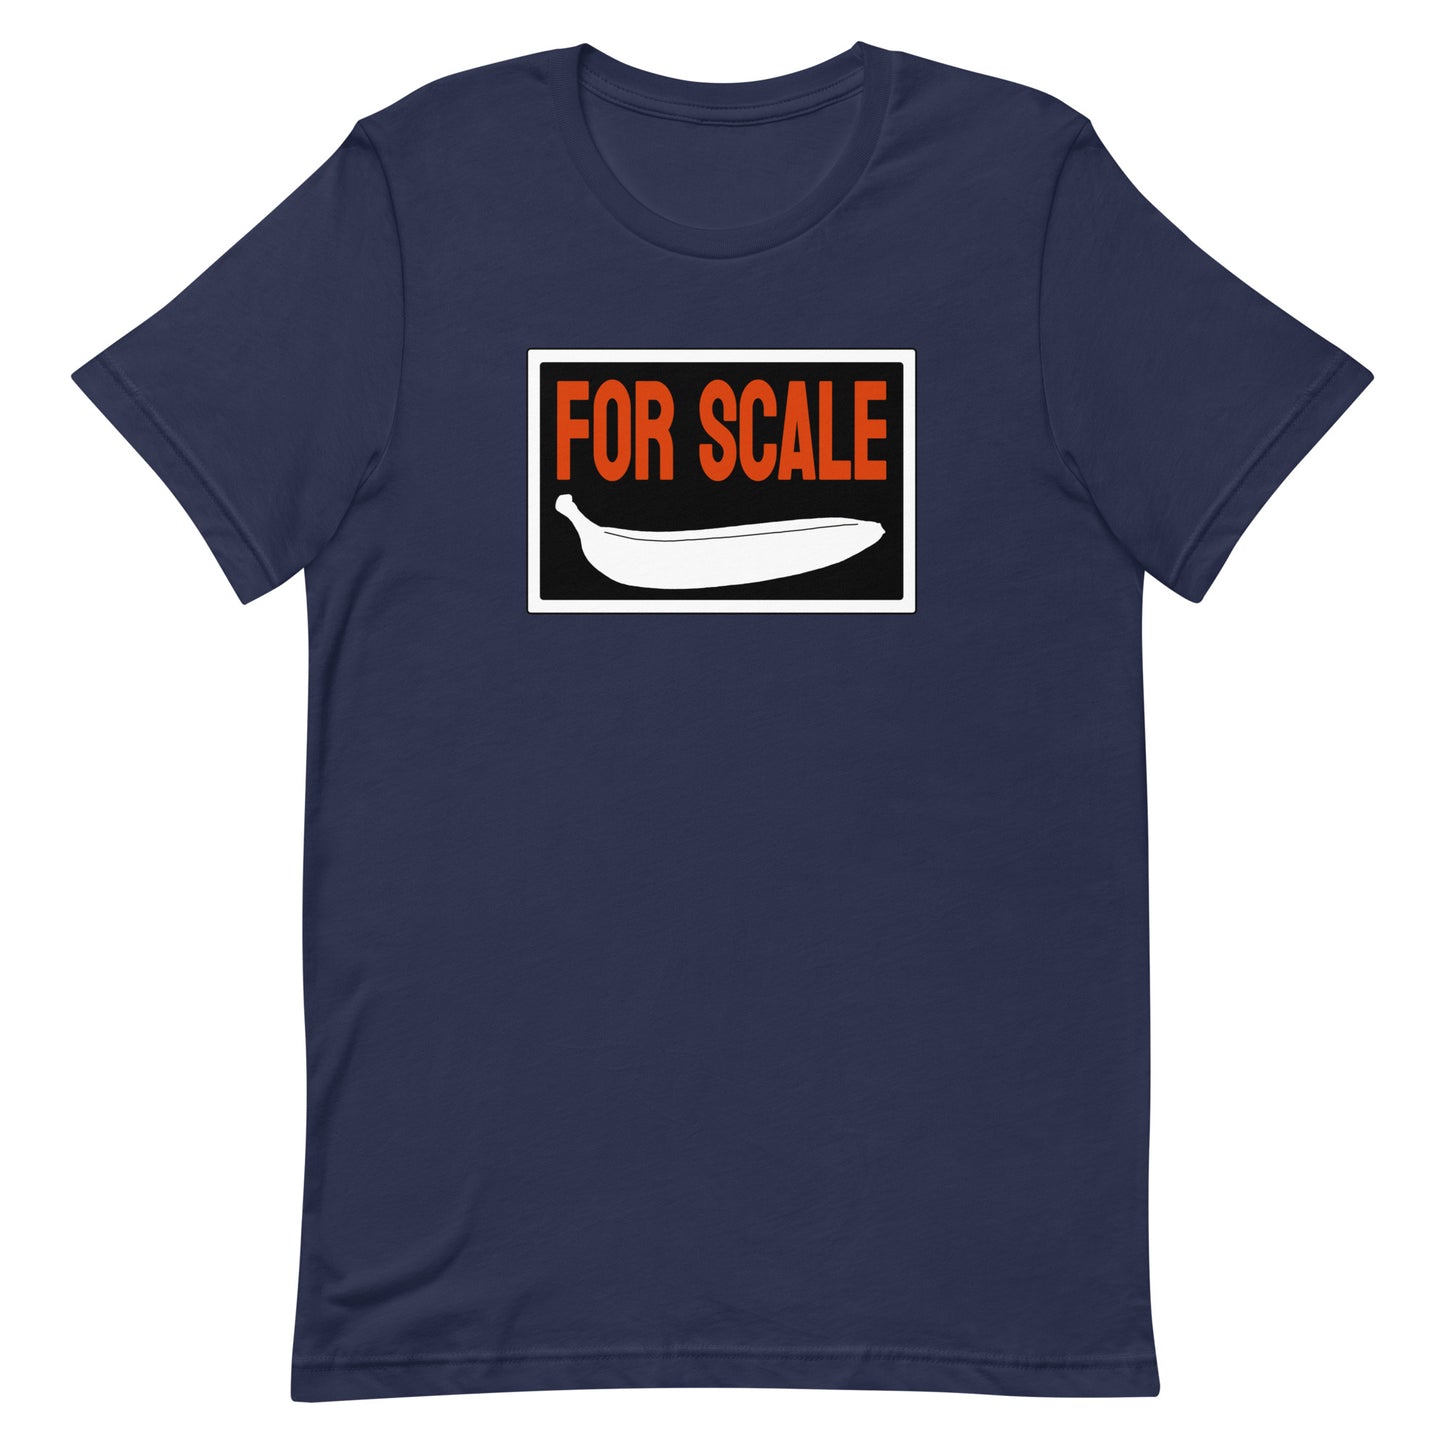 For Scale T-shirt